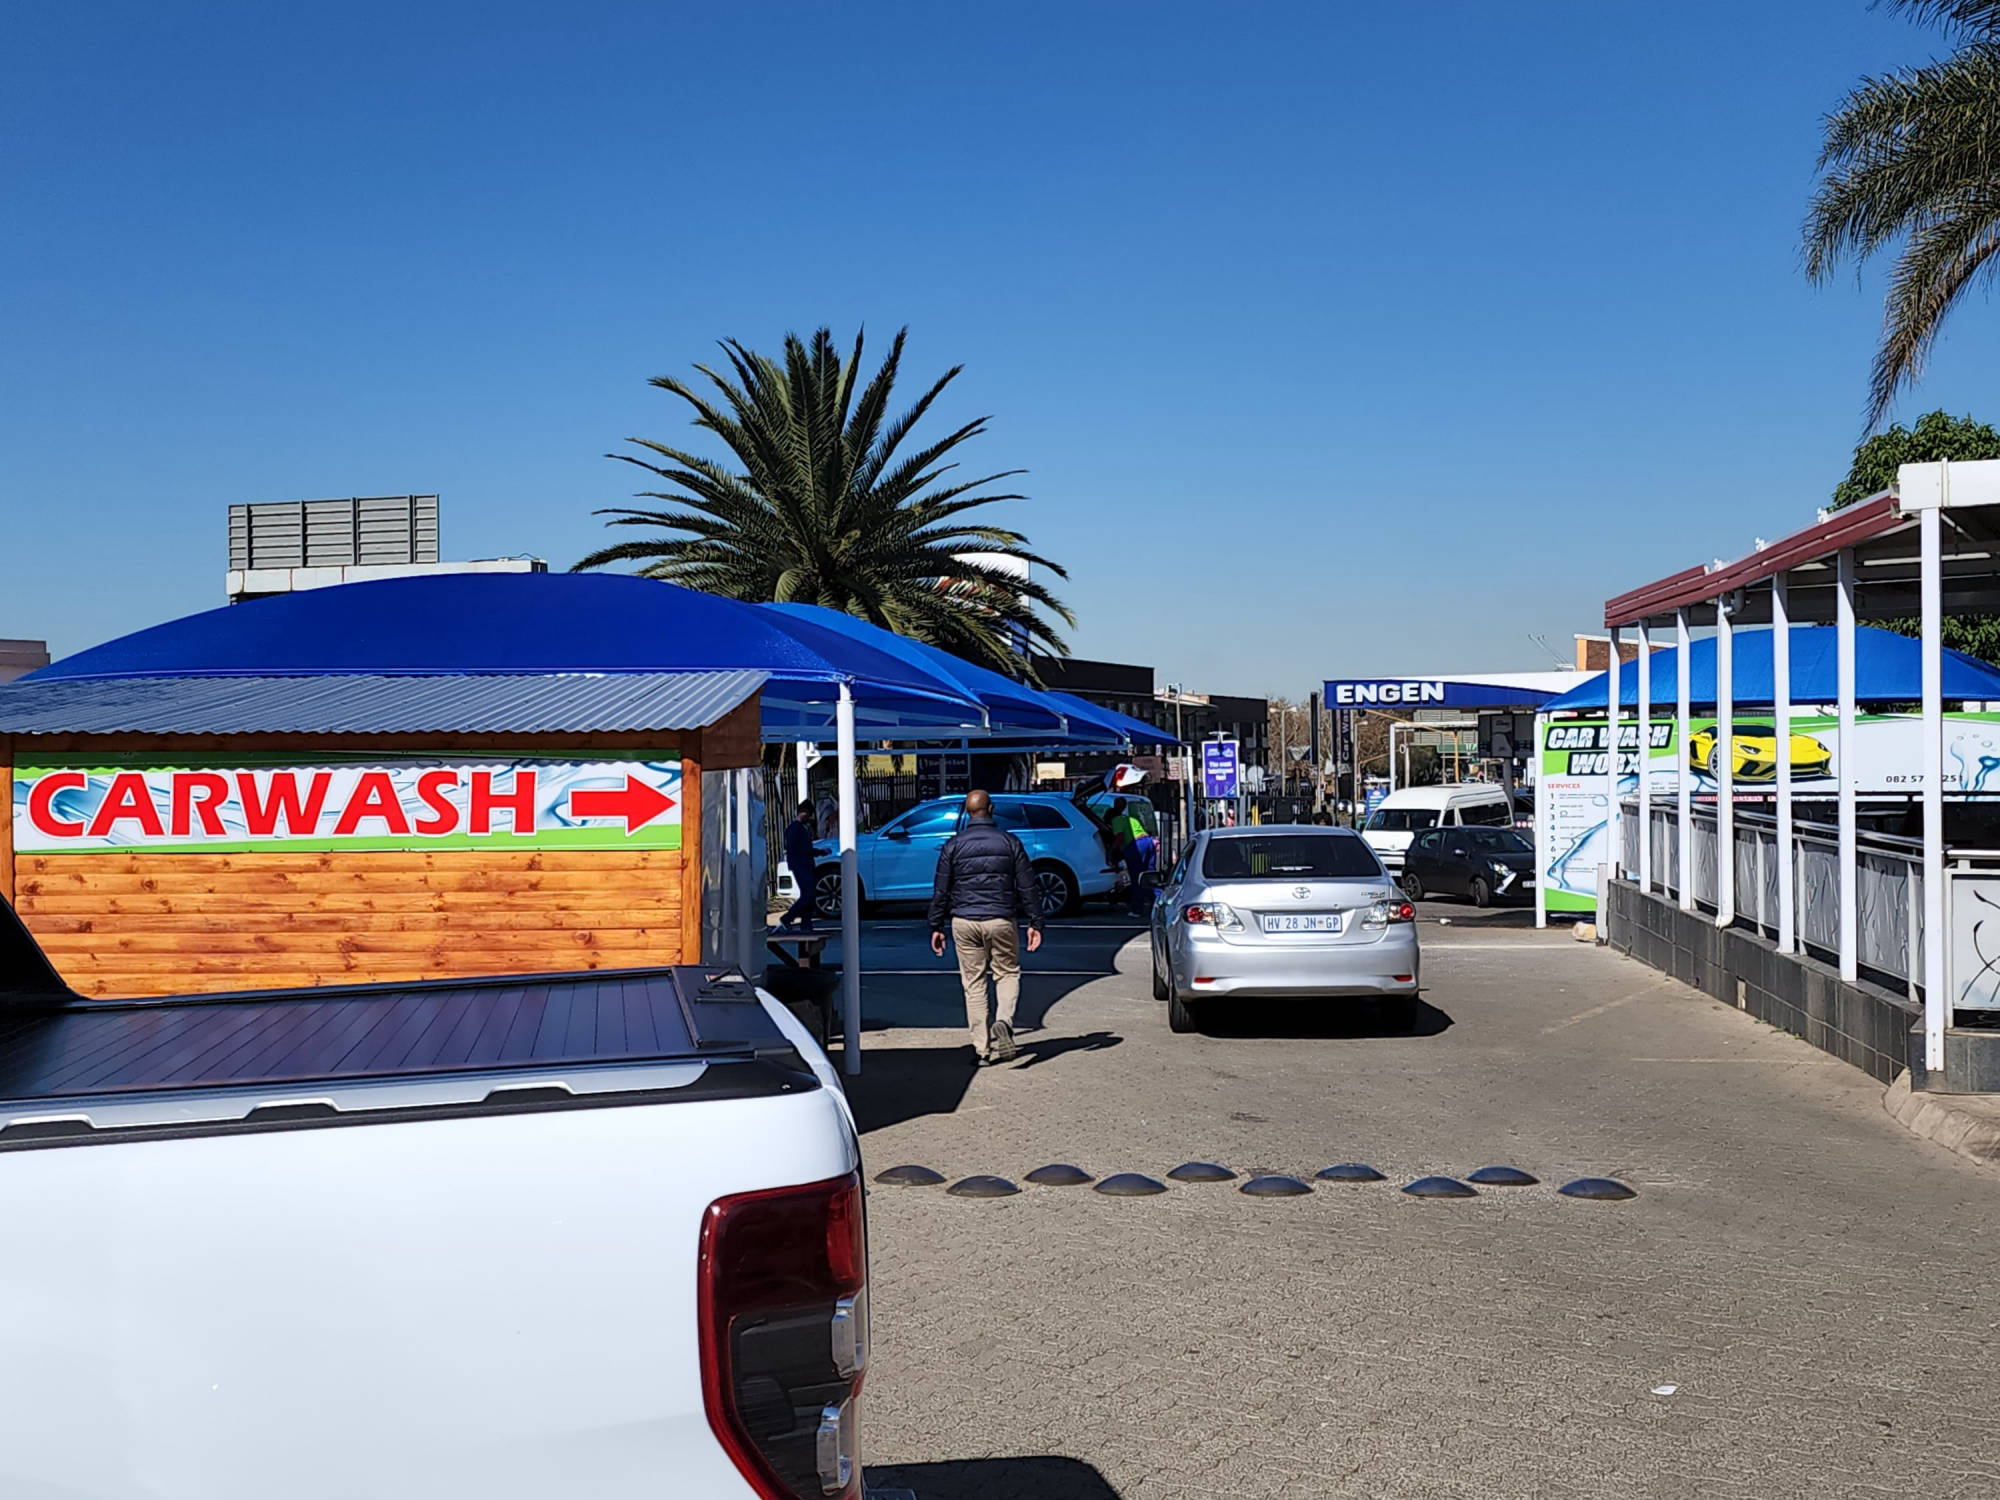 CarWash Worx Alberton Crossing Branch, Car Wash Franchises Available, CarWash Worx Head Office, Join The Leading Car Wash Franchising Group, Start Your Own Successful Car Wash Business Now